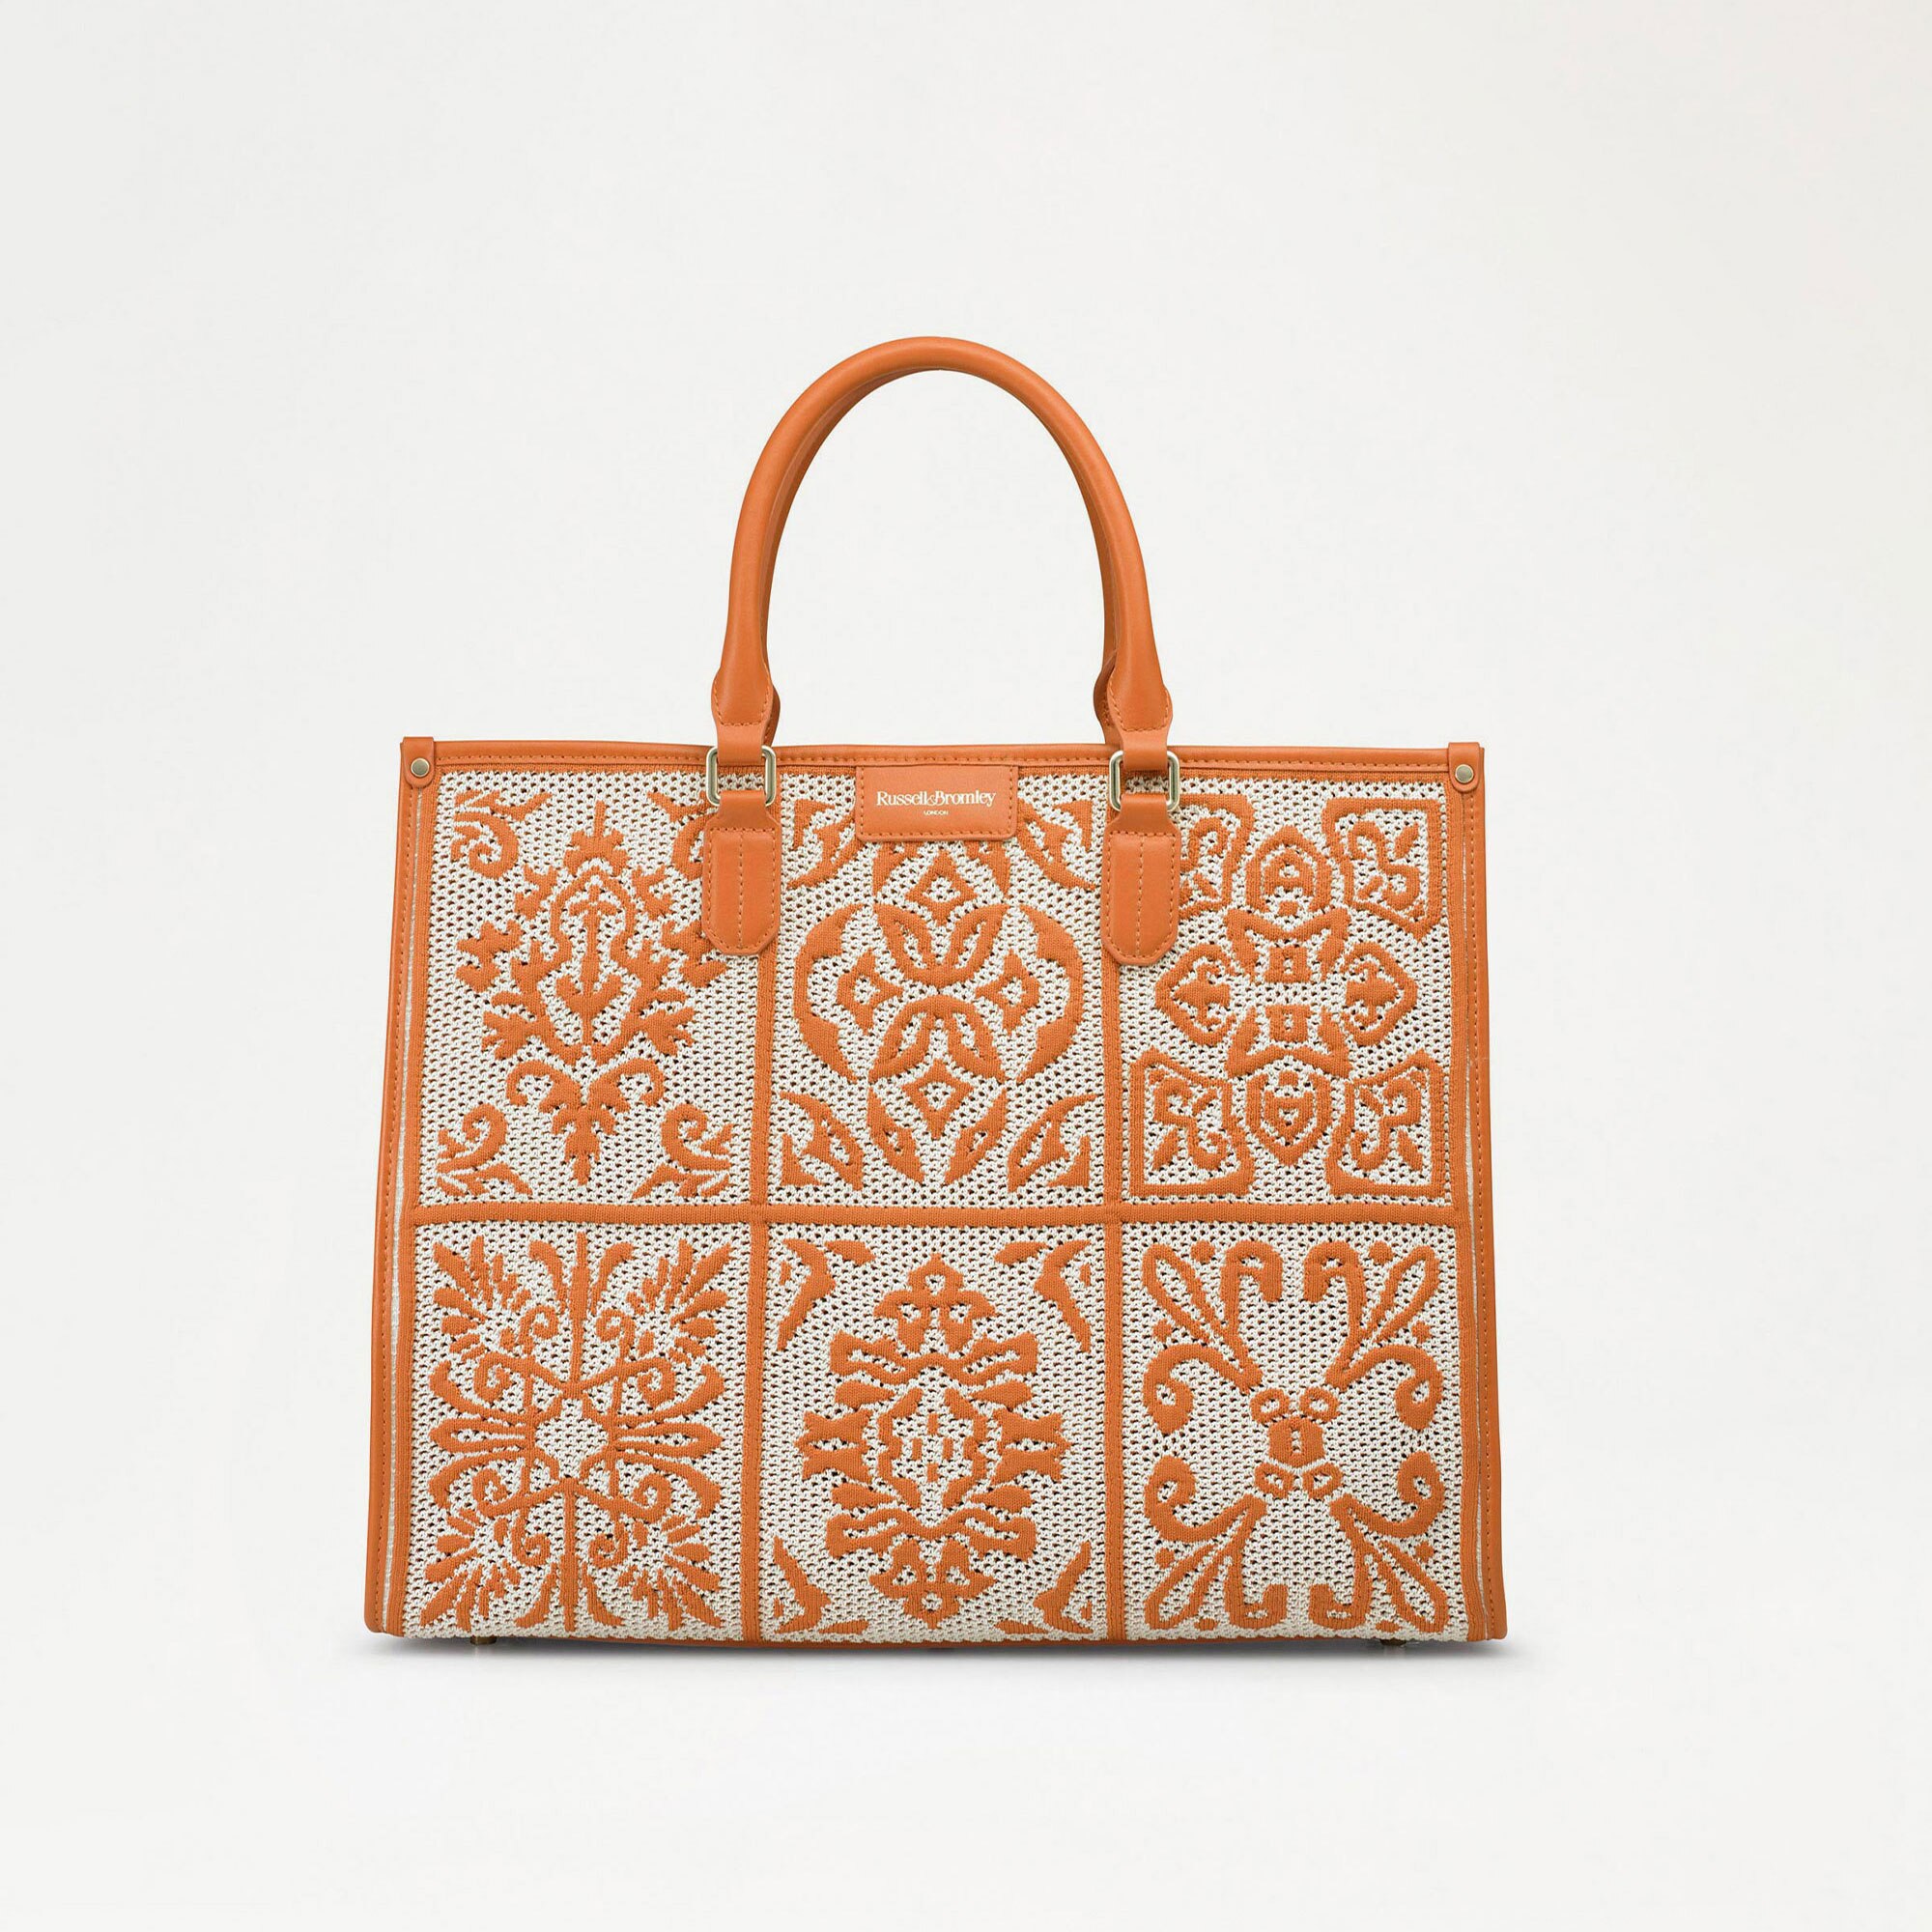 GEMINI Canvas Tote in Gold Textile Russell  Bromley